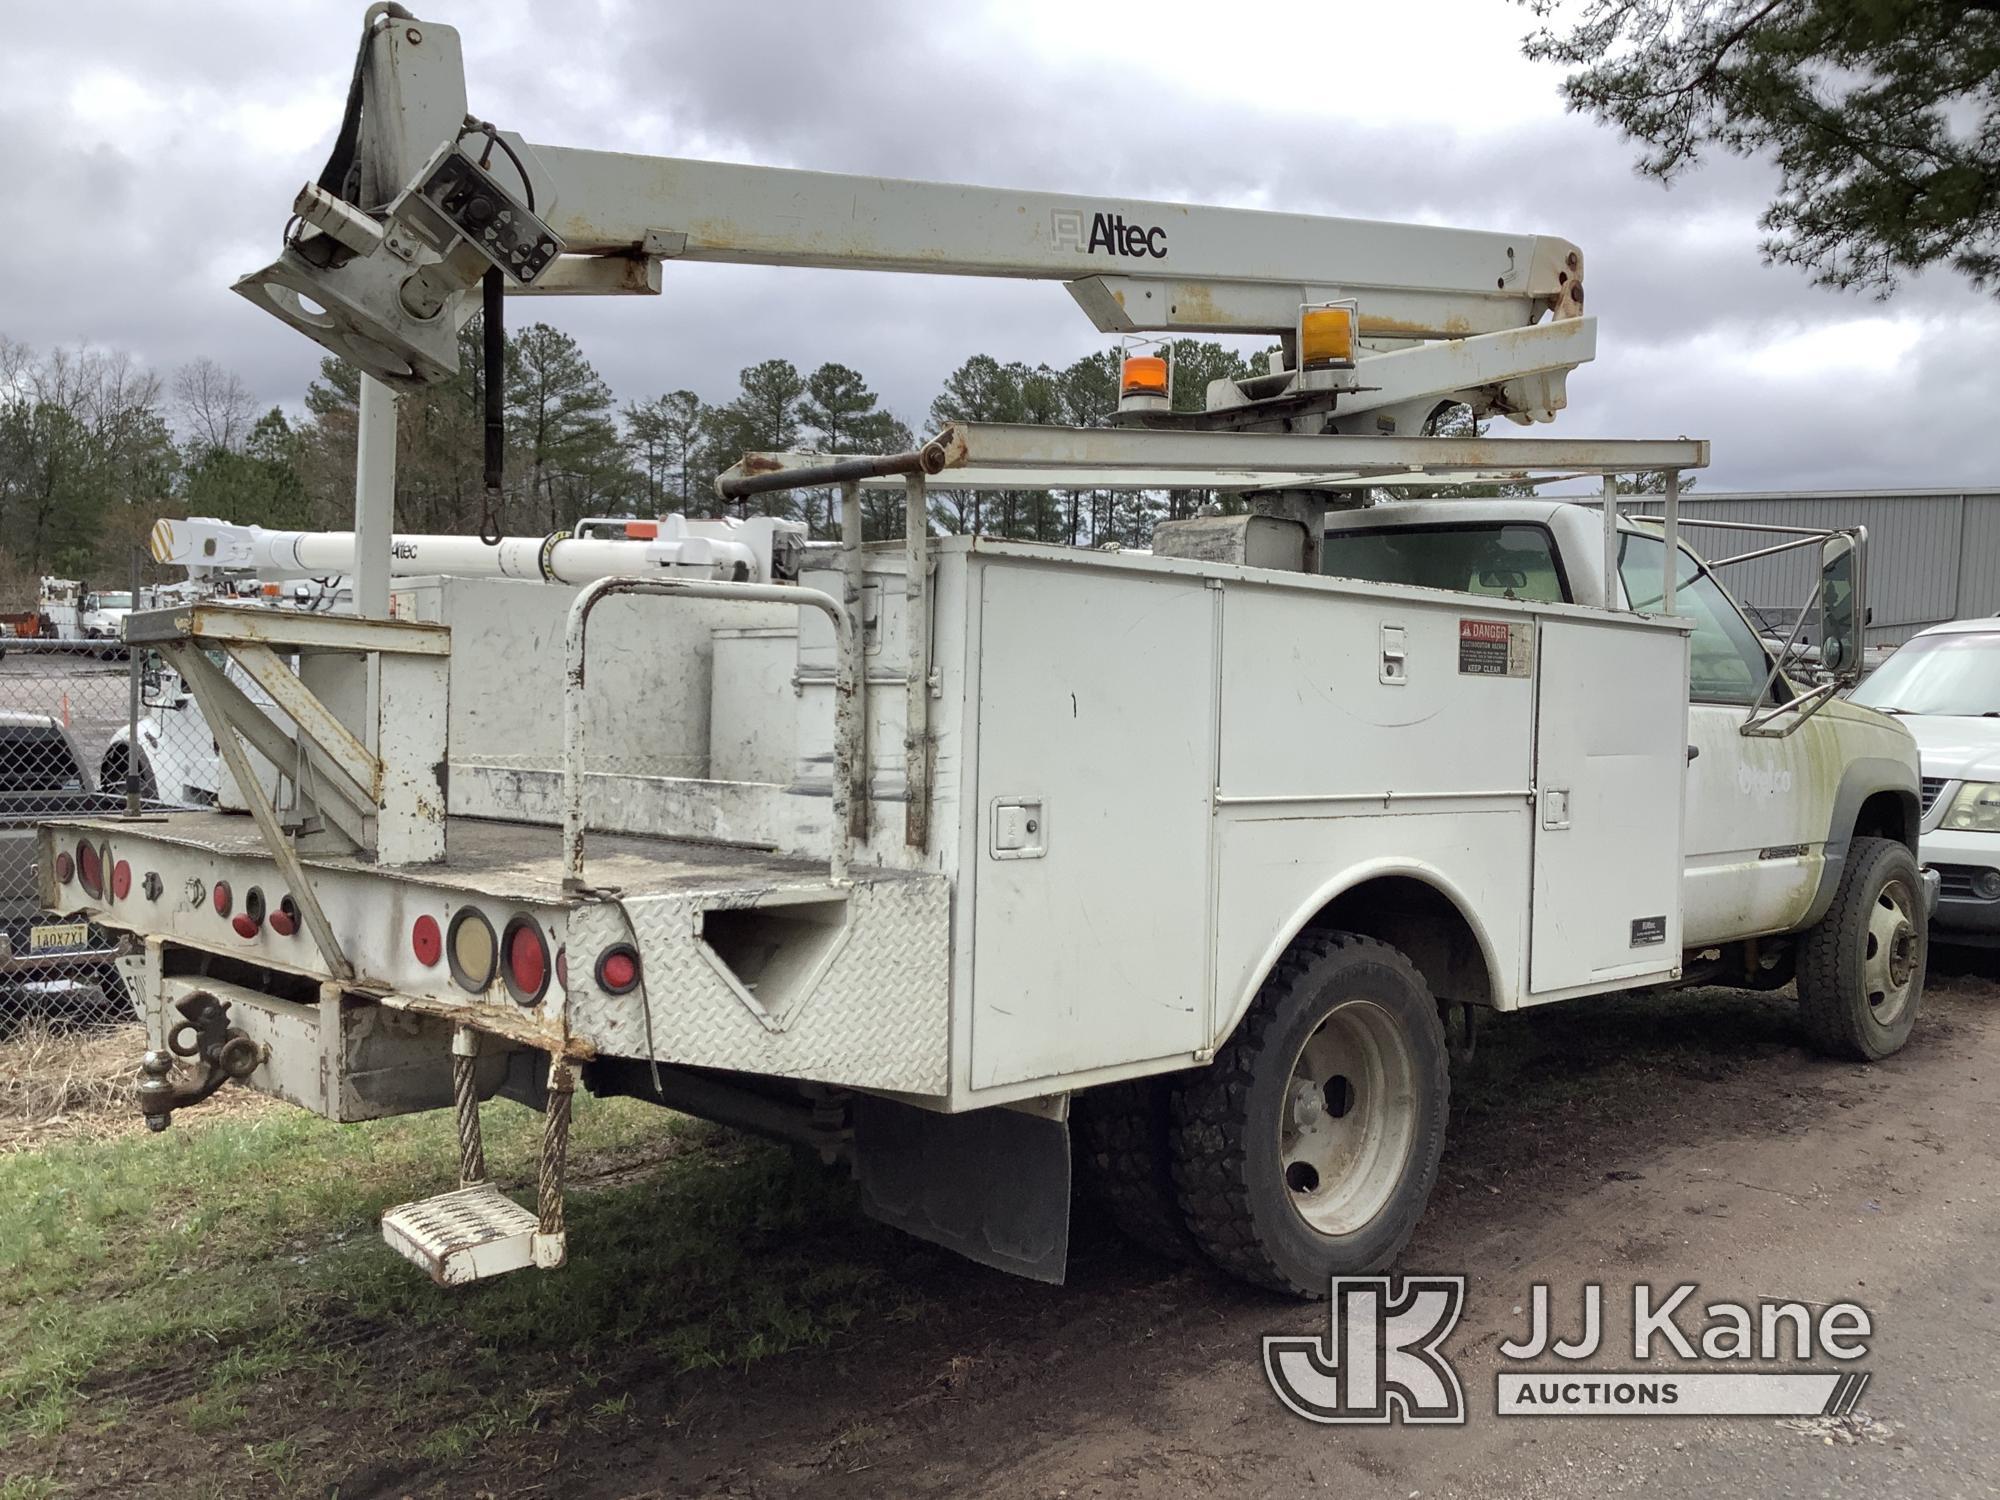 (Graysville, AL) Altec AT200-A, Telescopic Non-Insulated Bucket Truck mounted behind cab on 1994 Che